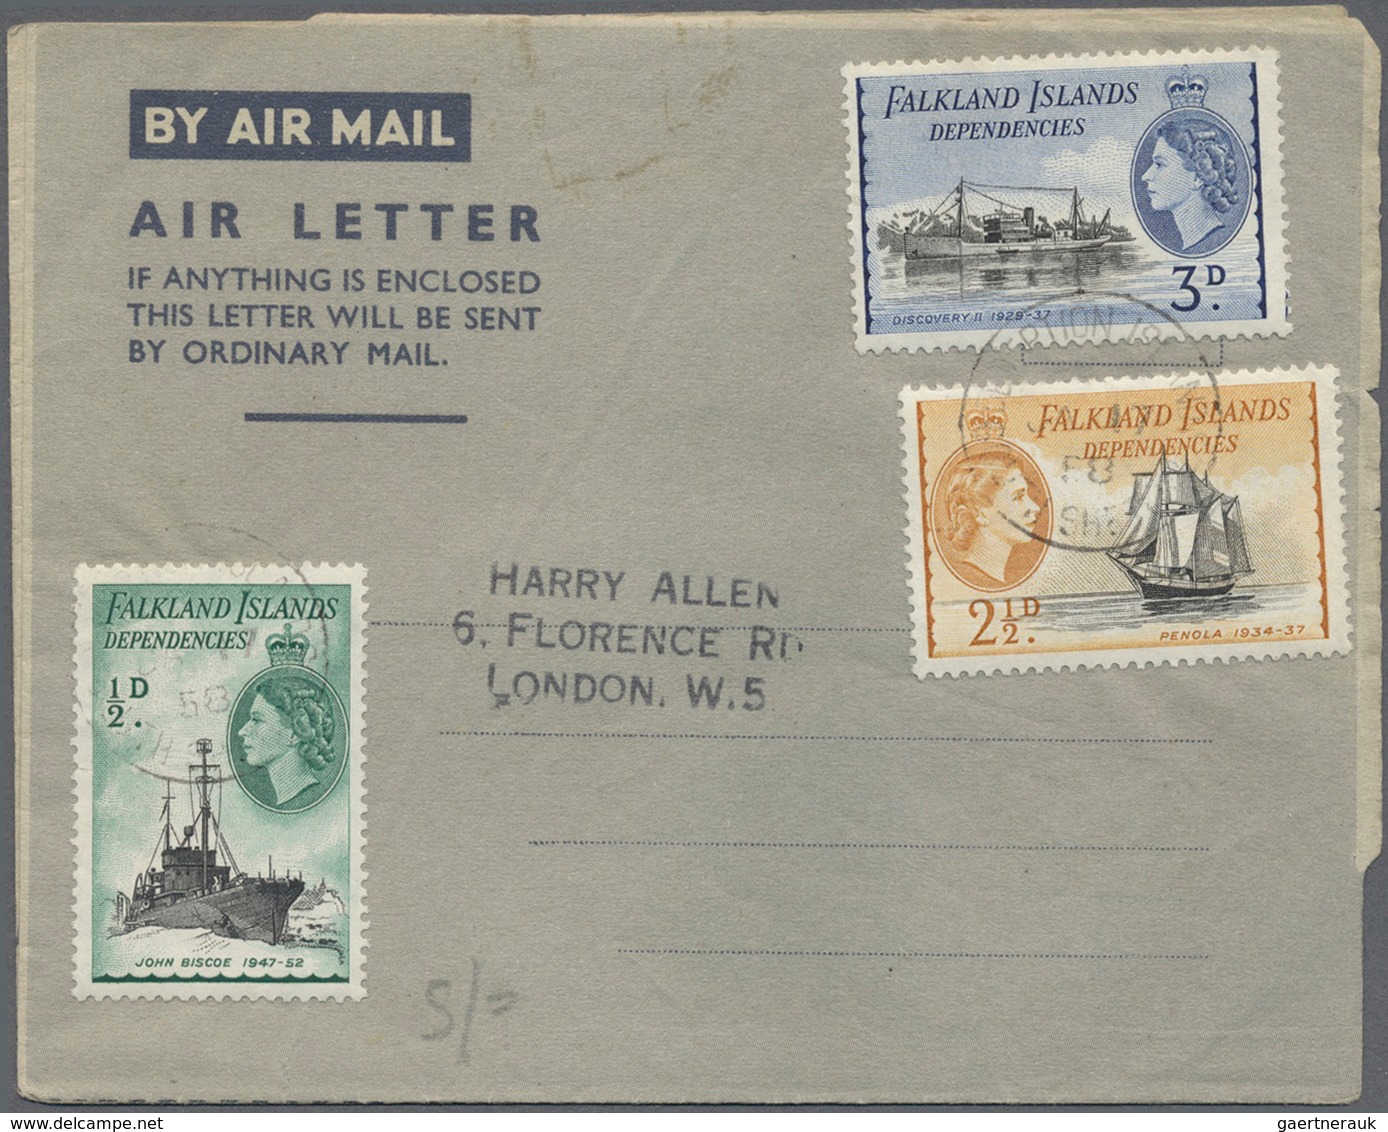 Falklandinseln: 1952/58, four air letters at 6d rate, franked KGVI (1) or QEII (3) on army form W301